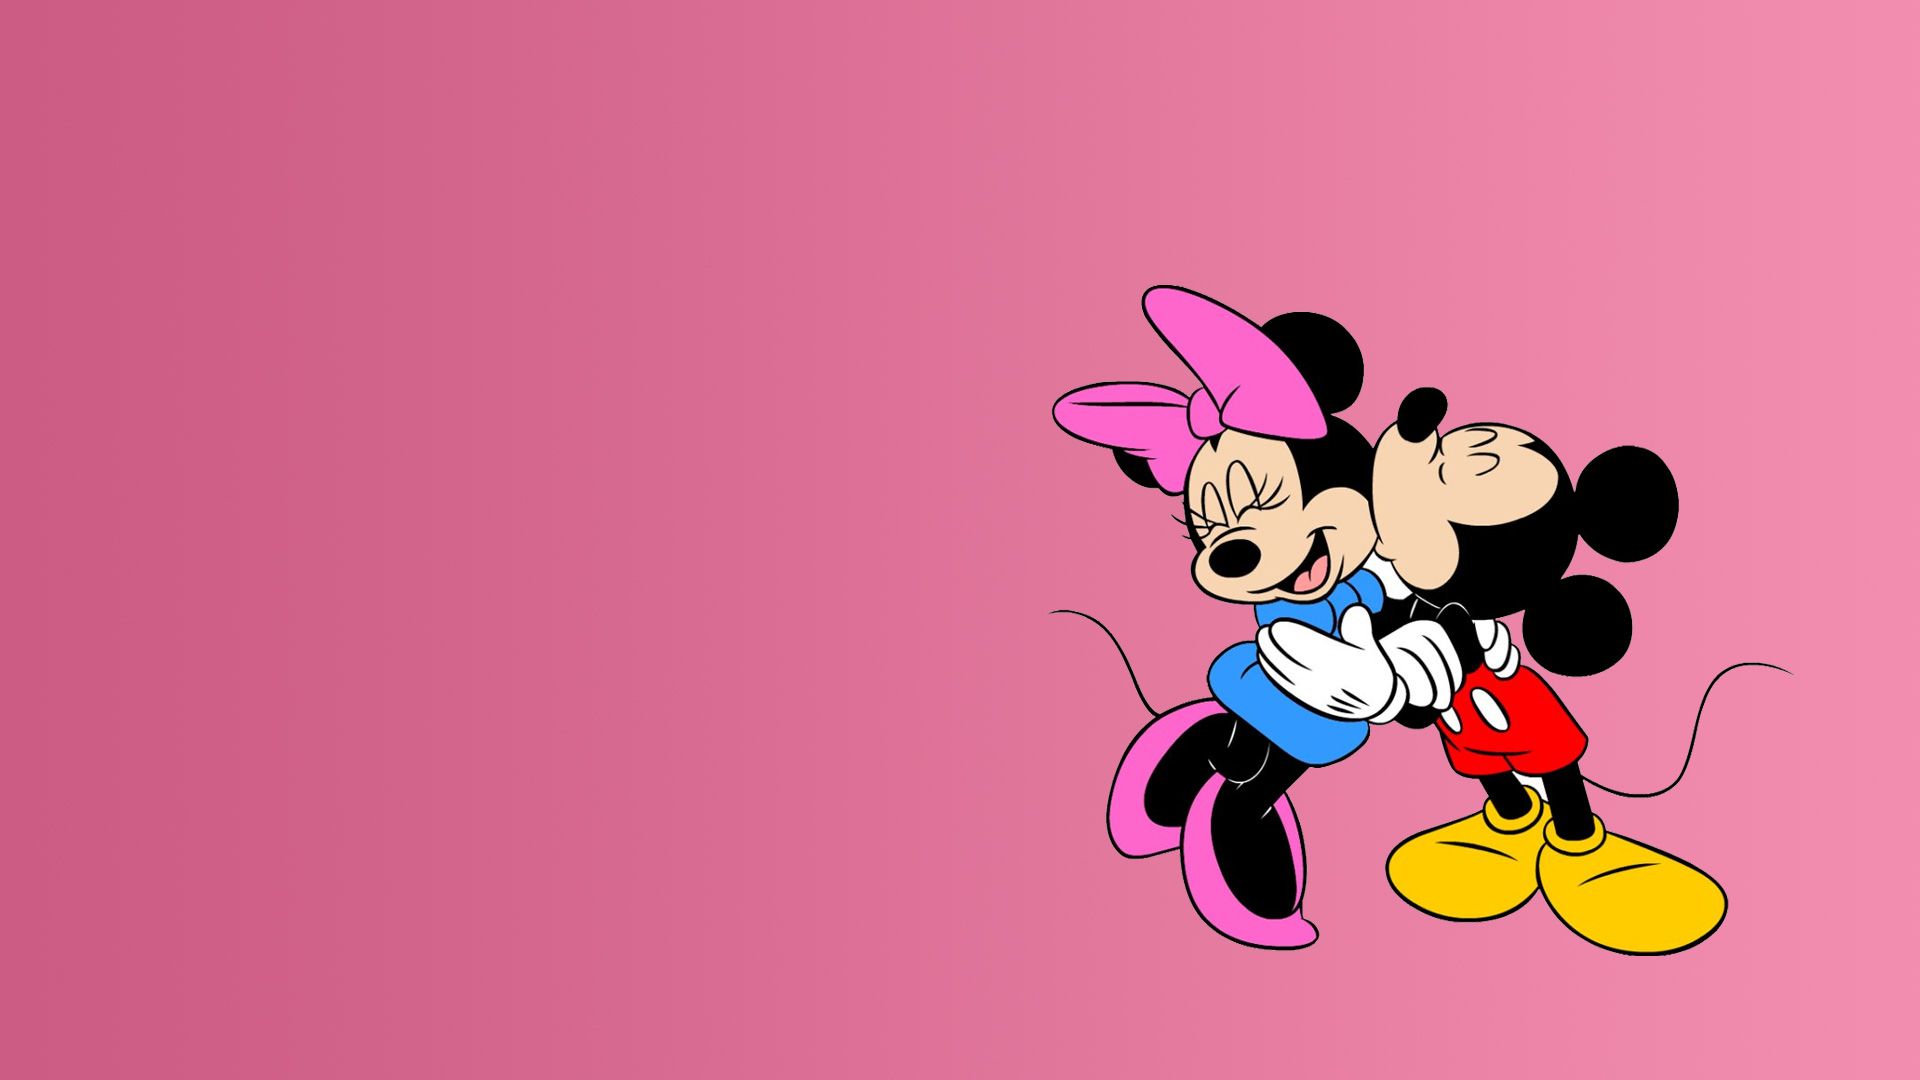 Mickey Mouse and Minnie Mouse wallpaper 1920x1080 - Minnie Mouse